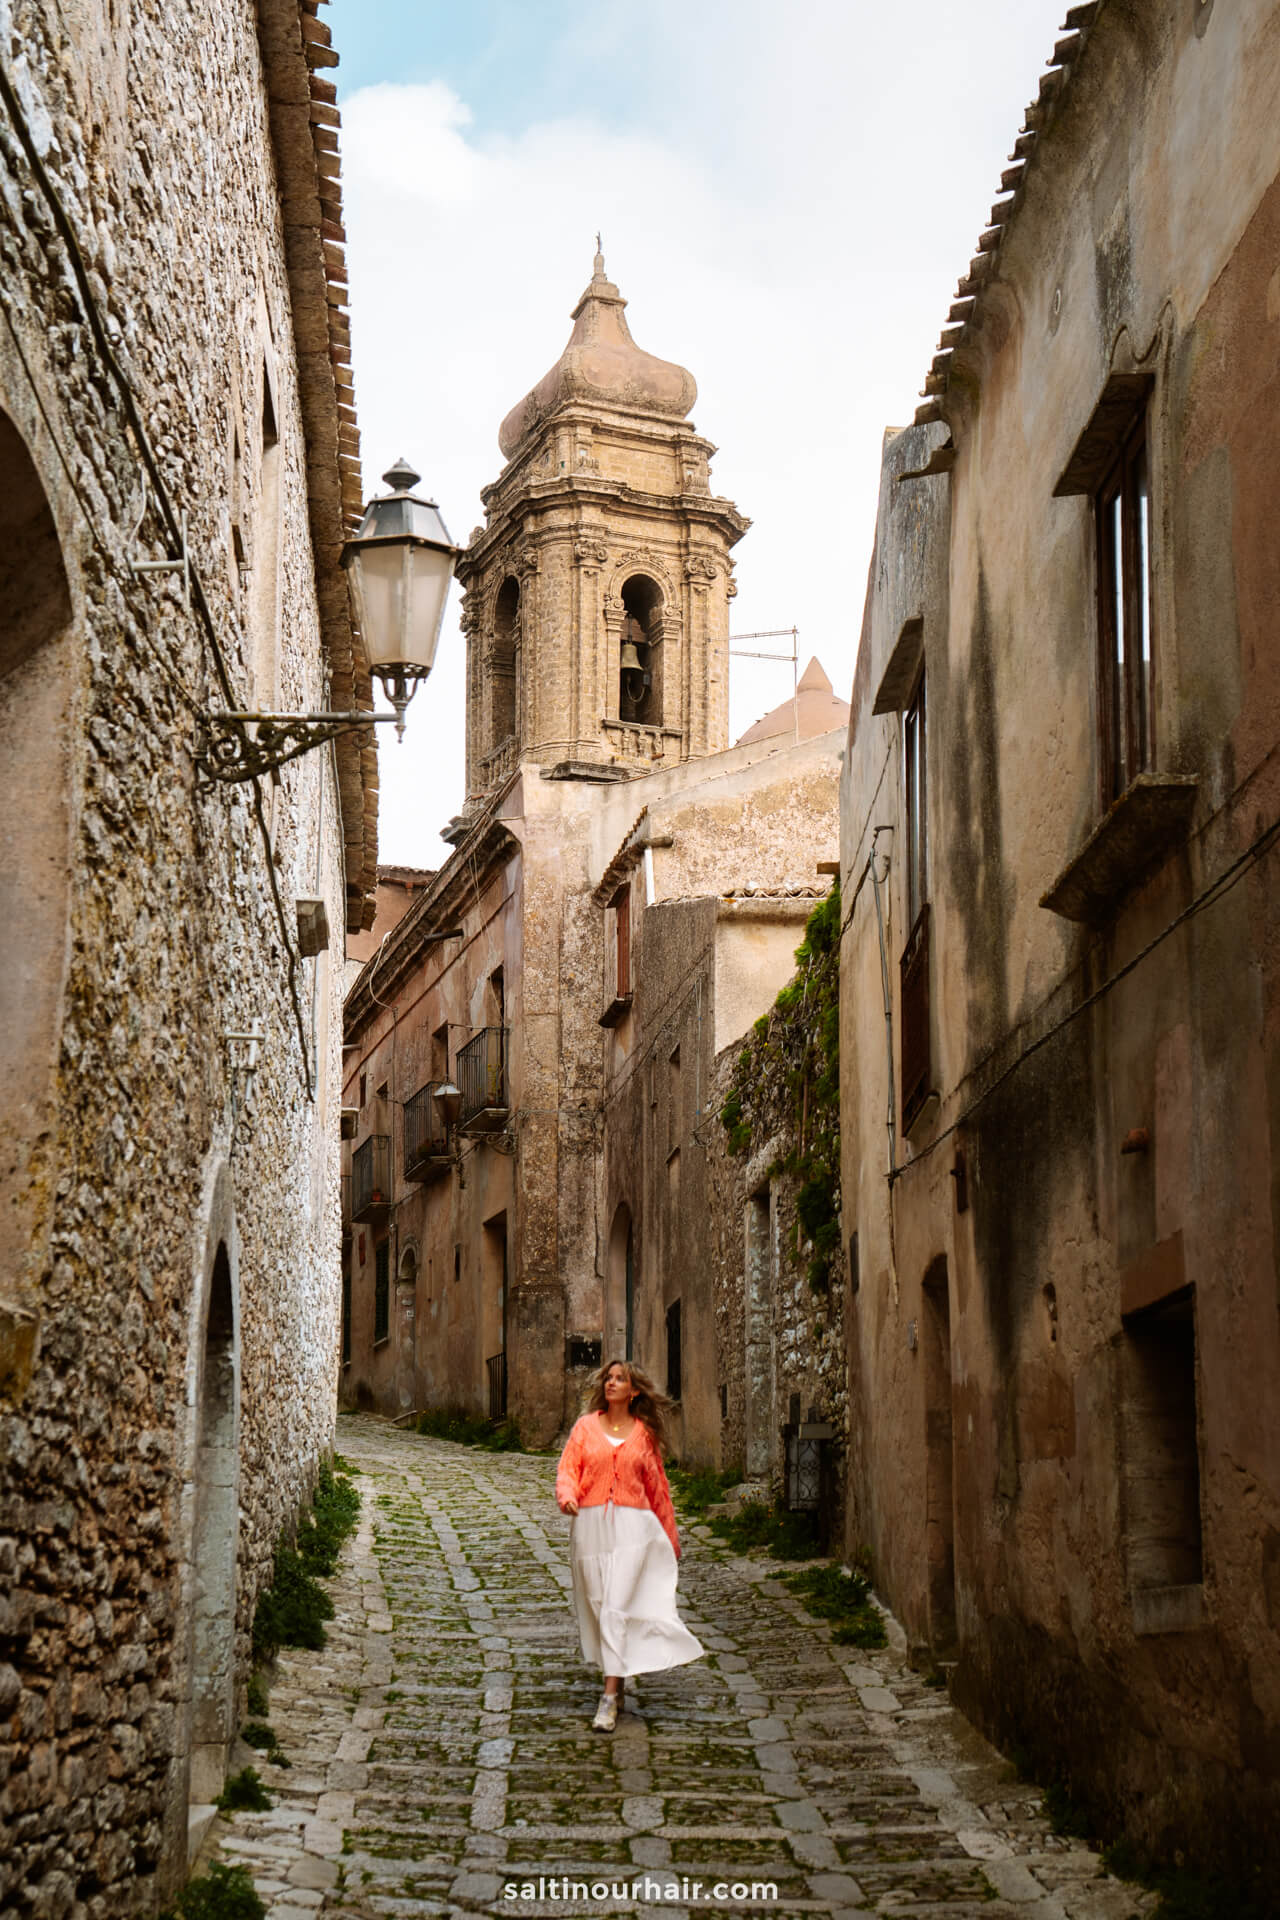 Things to do in erice sicily italy